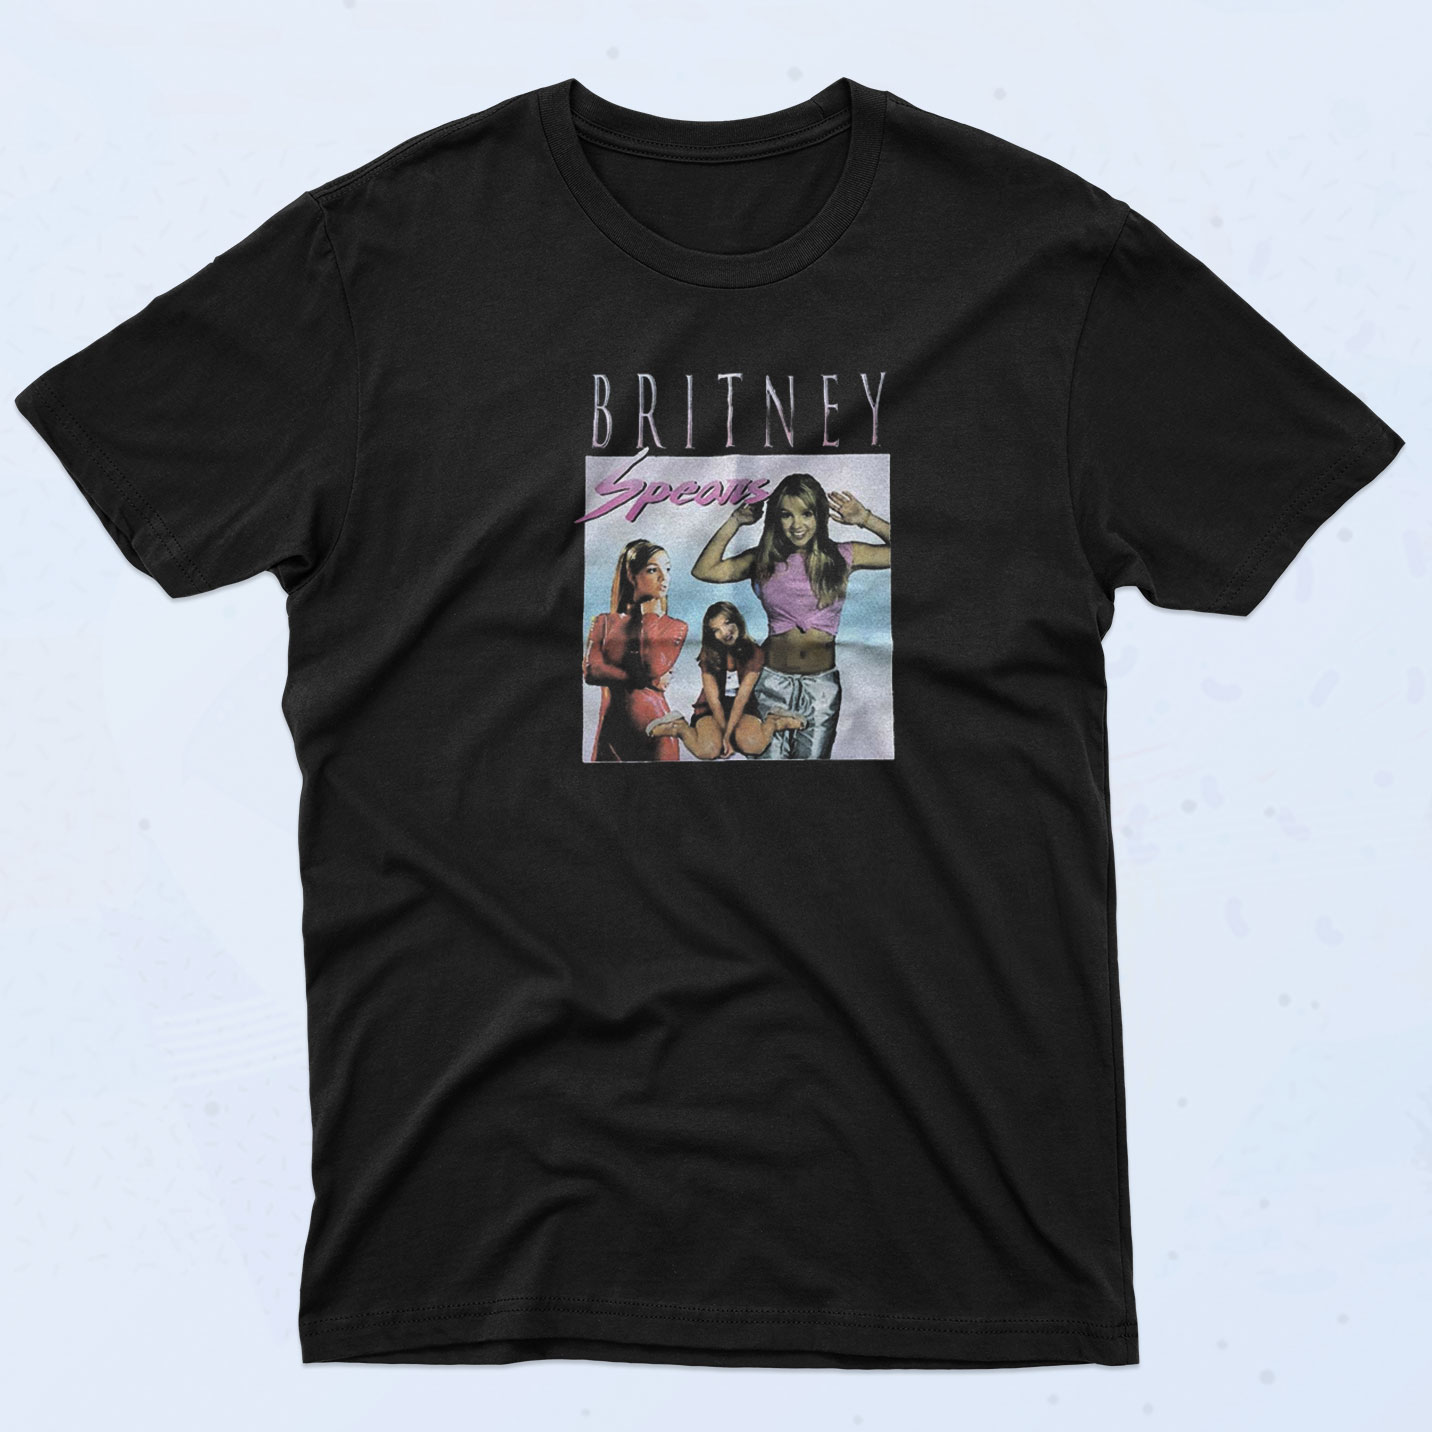 Britney Spears Poster T Shirt - 90sclothes.com